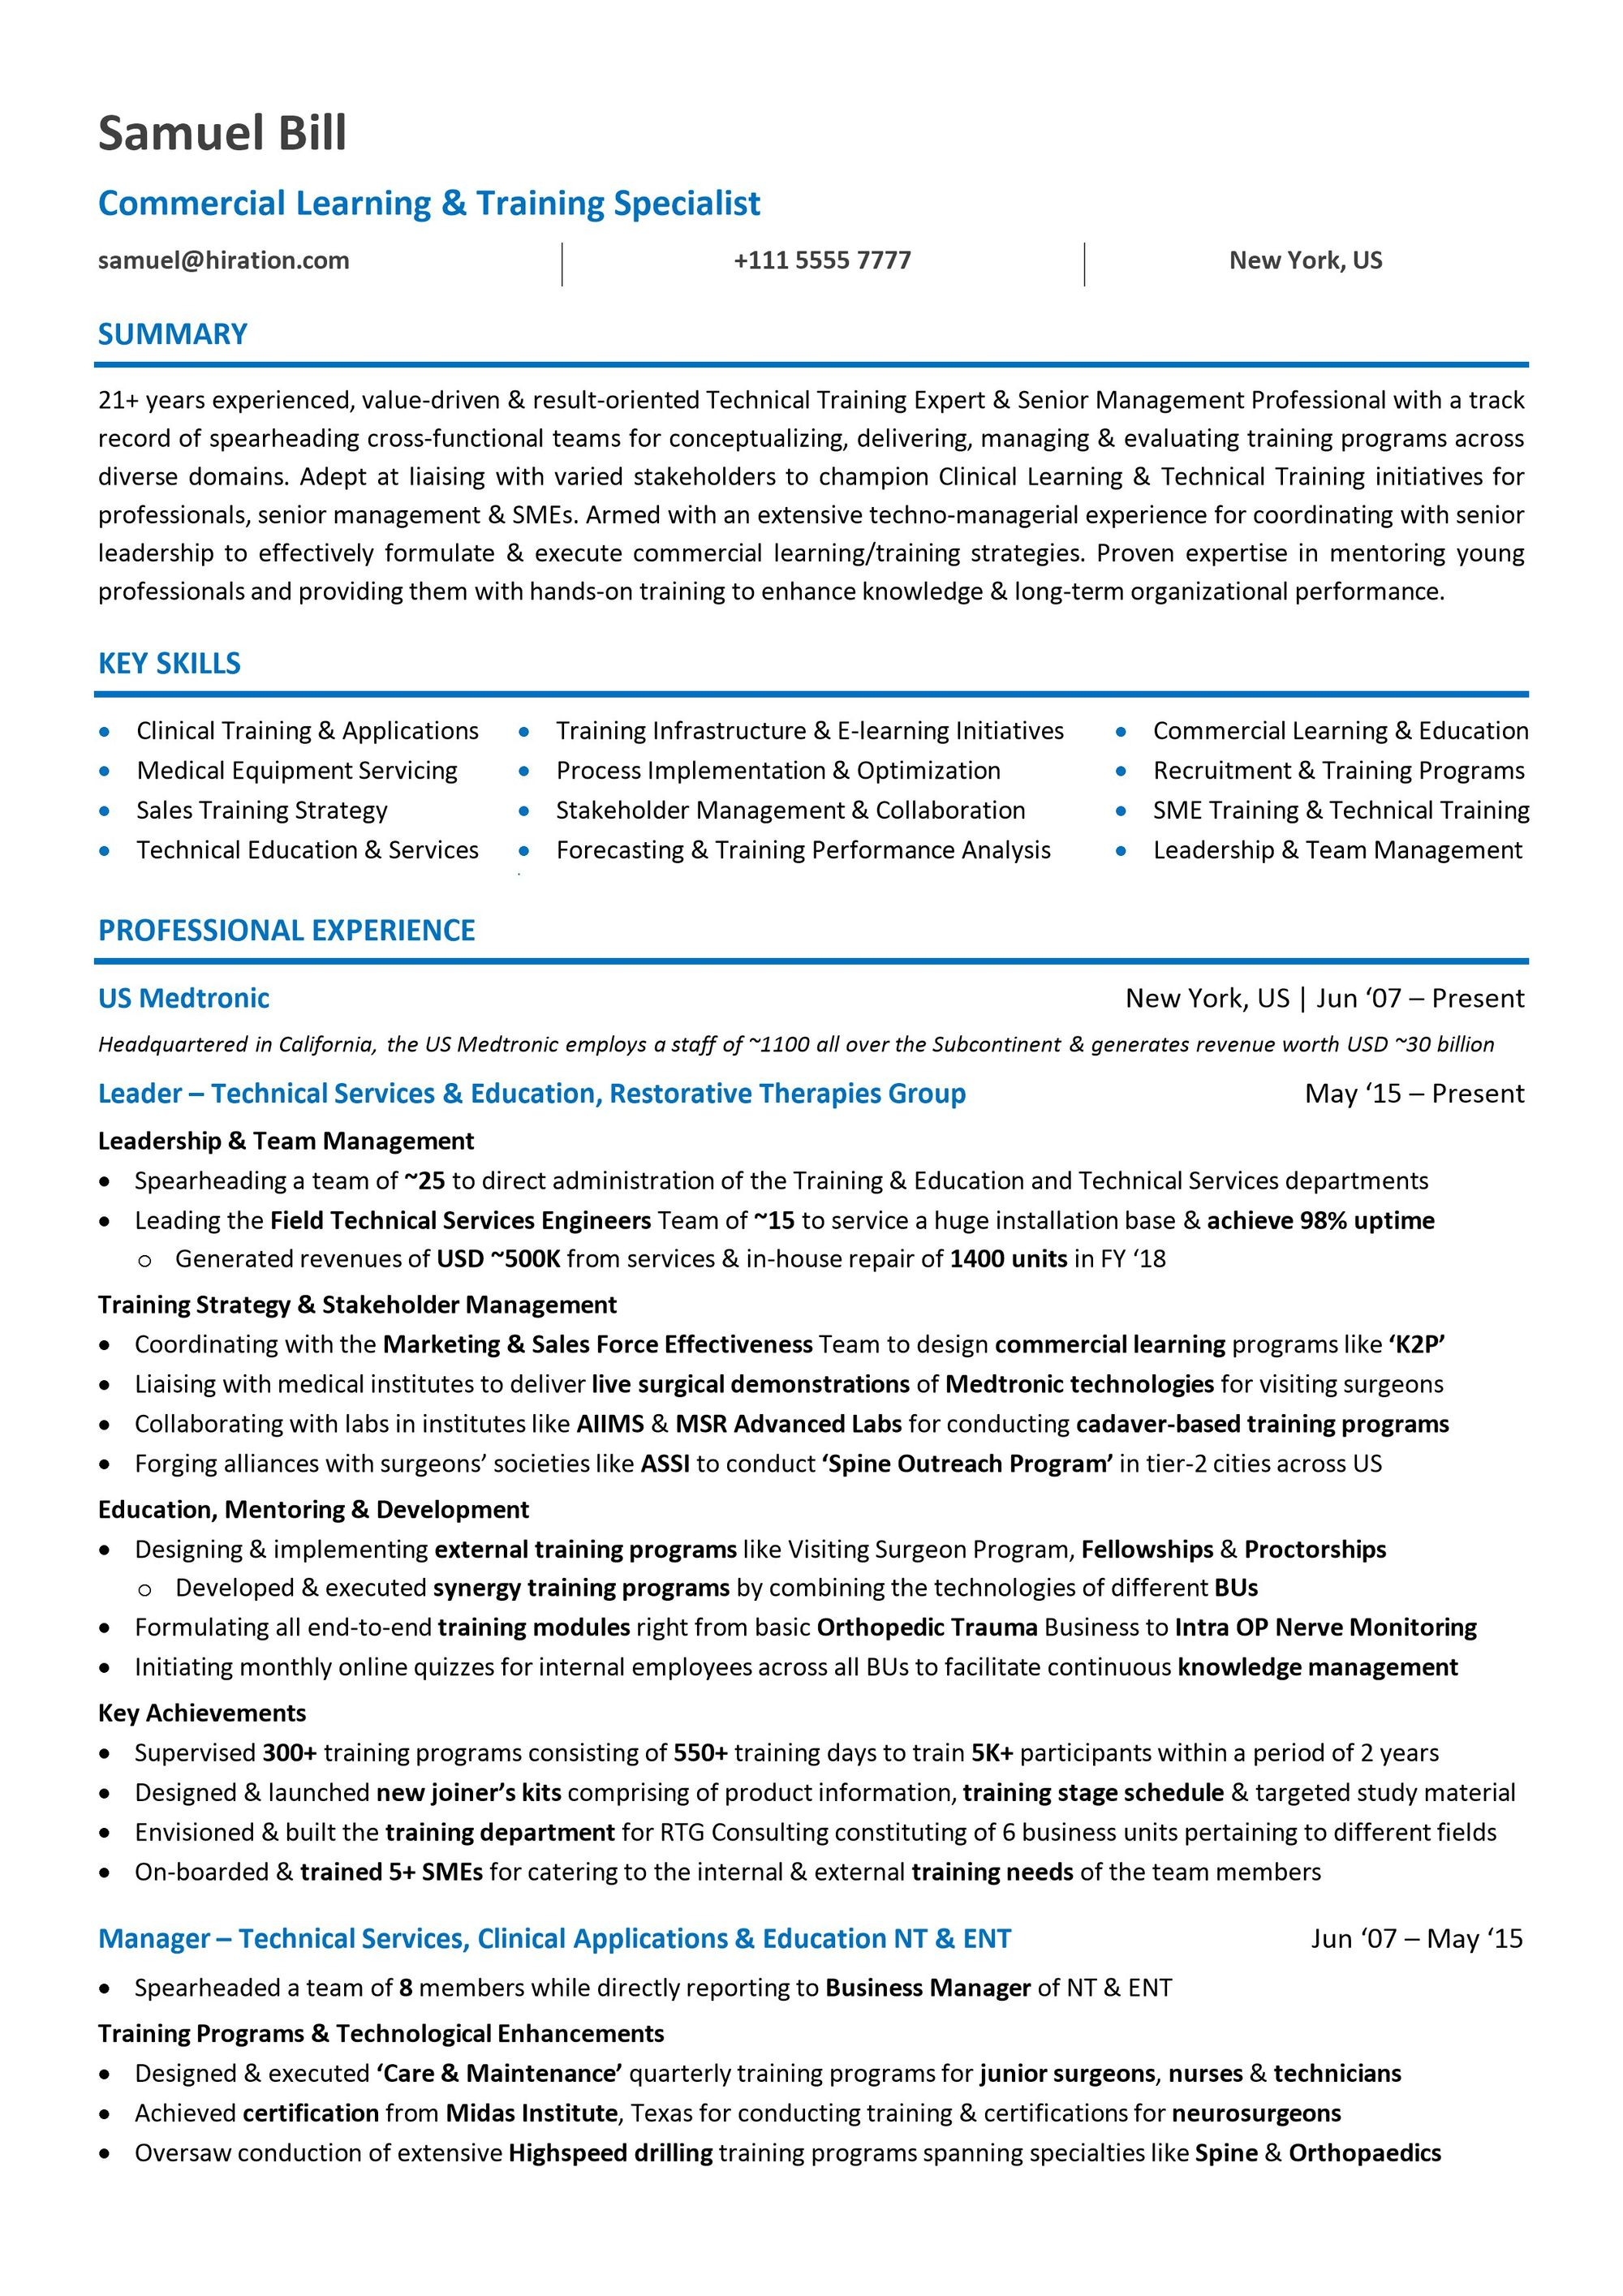 Career Change Resume Career Change Resume 2019 Guide To Resume For Career Change